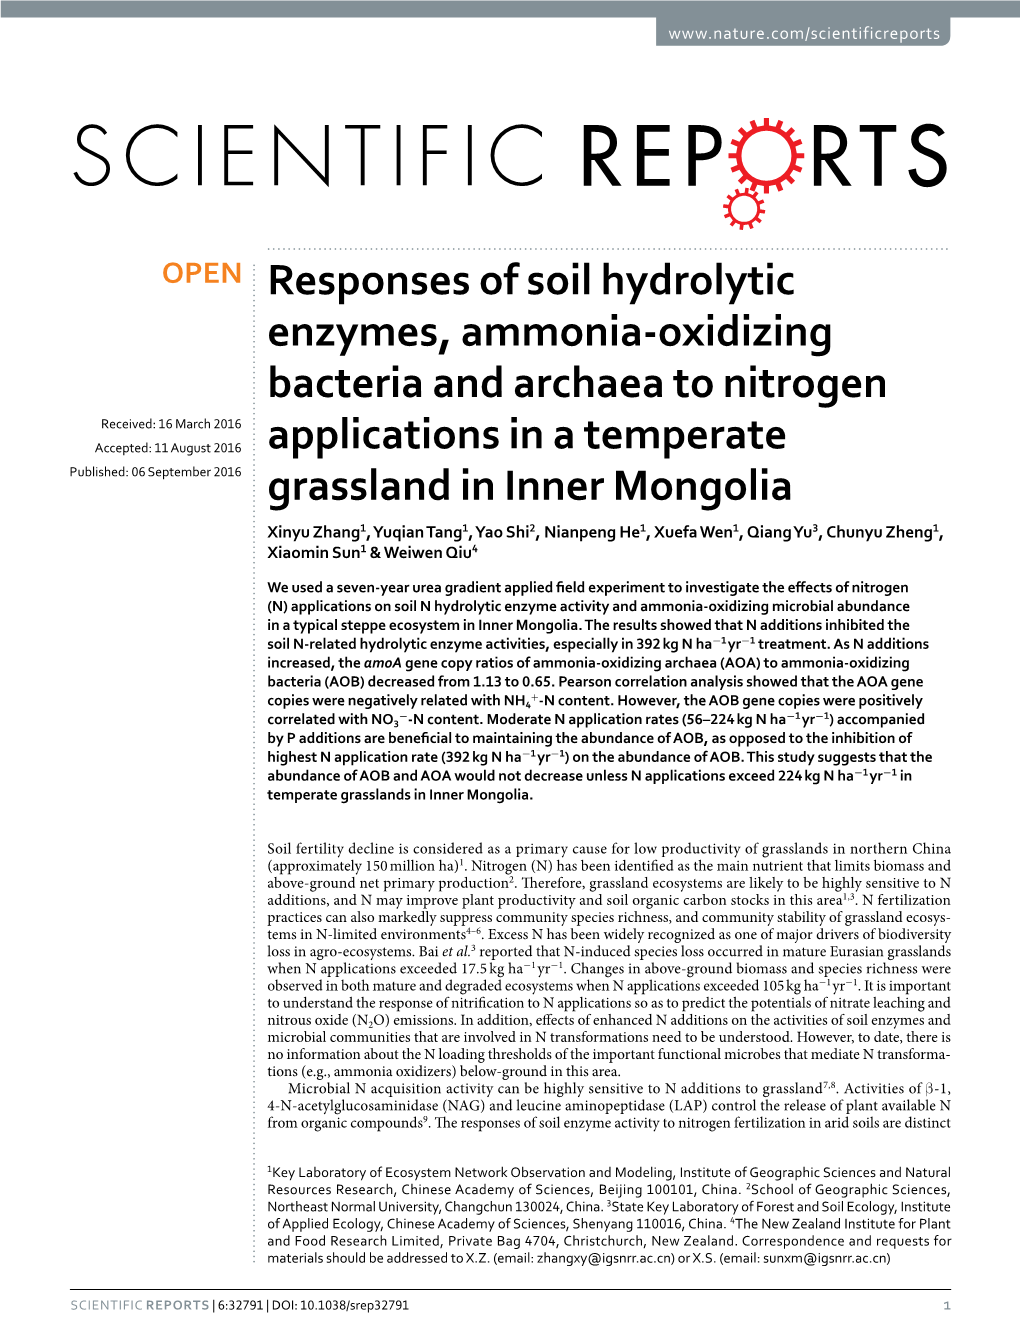 Responses of Soil Hydrolytic Enzymes, Ammonia-Oxidizing Bacteria and Archaea to Nitrogen Applications in a Temperate Grassland in Inner Mongolia